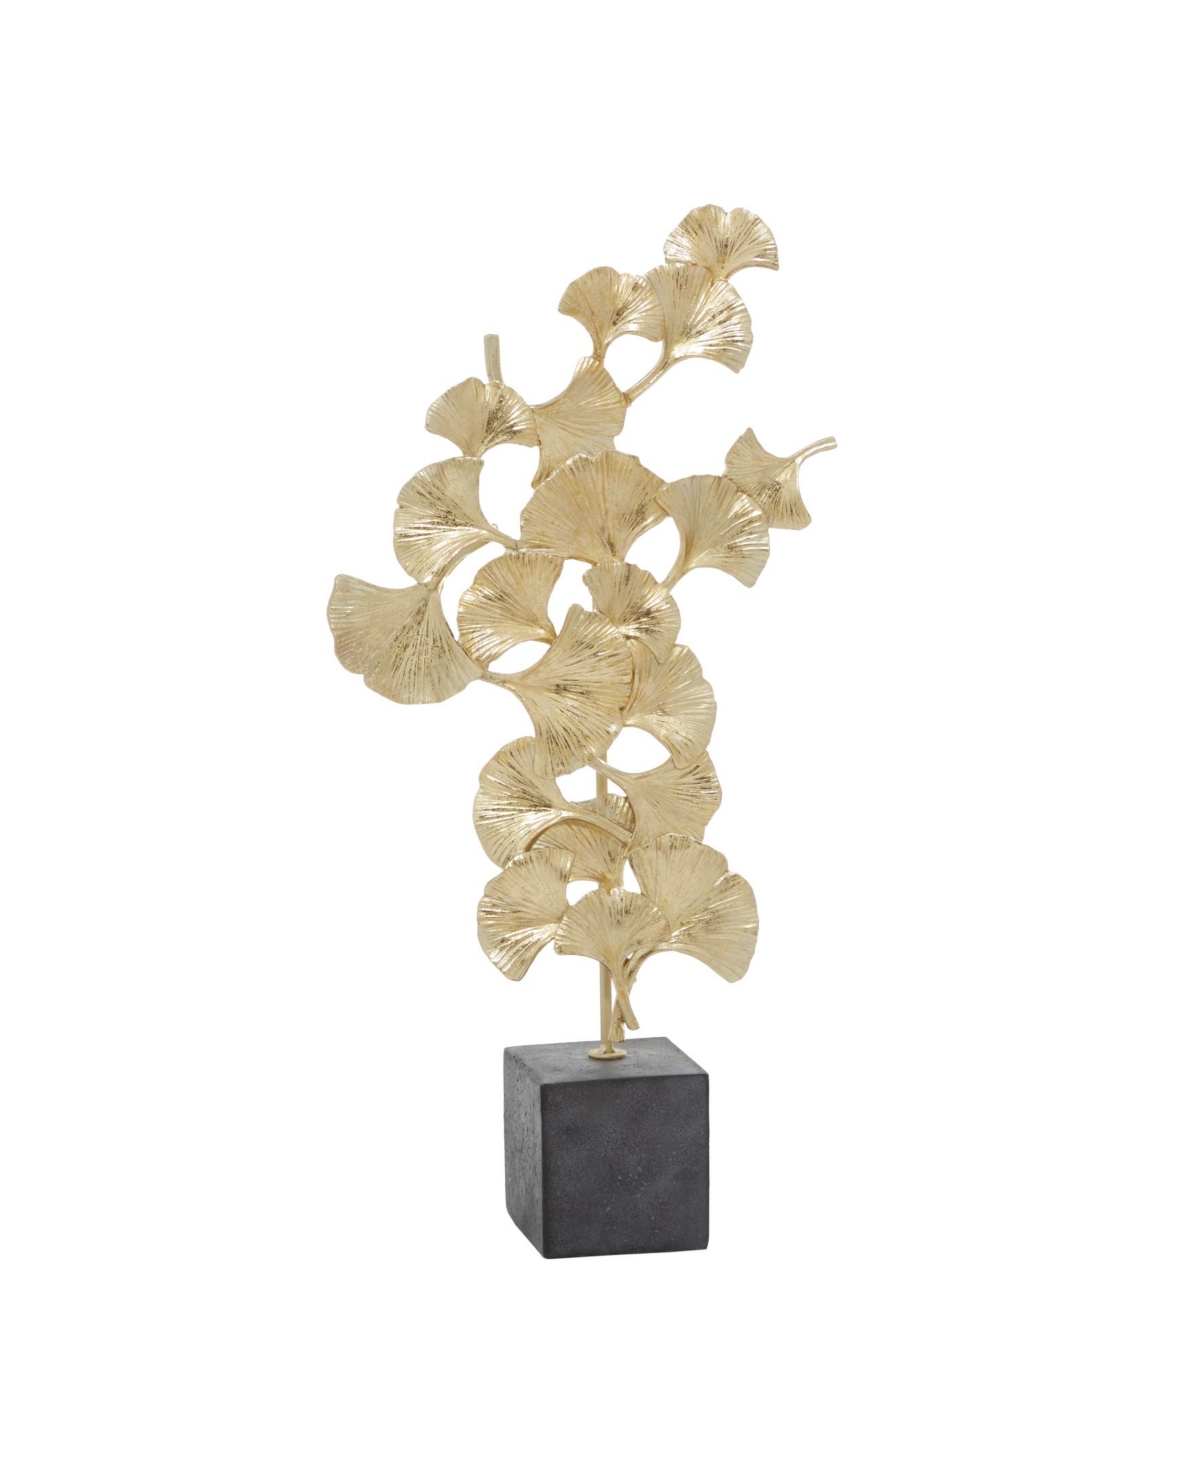 Rosemary Lane Polyresin Contemporary Gingko Leaf Sculpture, 20" X 10" In Gold-tone